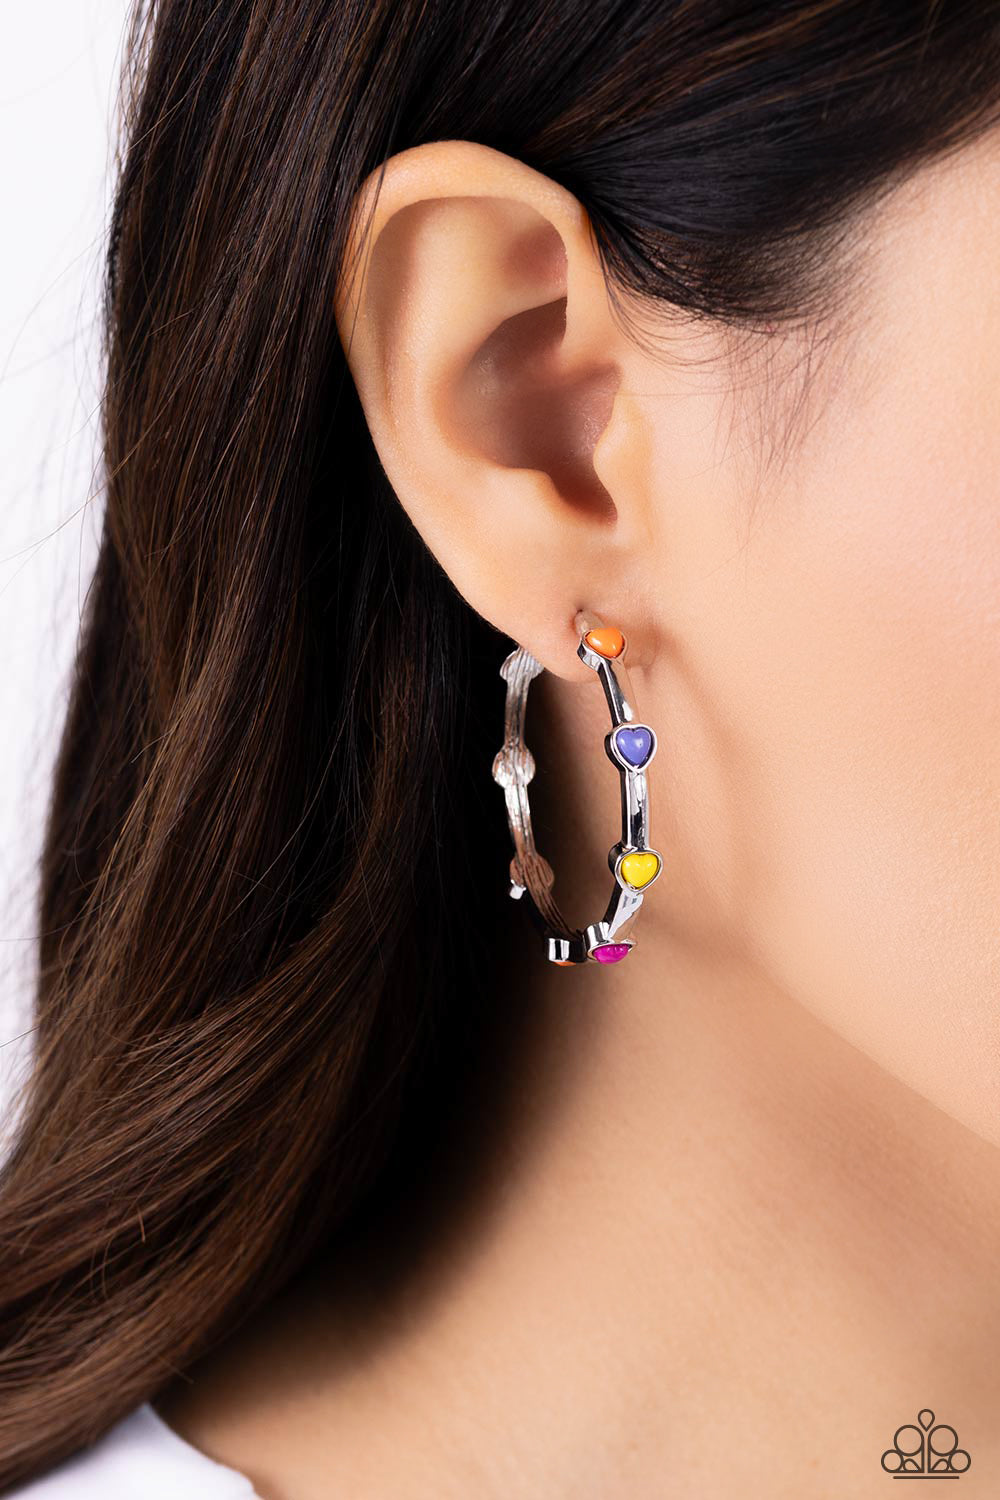 A charming collection of orange, Persian Jewel, High Visibility, and Rose Violet hearts adorn a classic silver hoop resulting in a romantic fashion. Earring attaches to a standard post fitting. Hoop measures approximately 1 1/2" in diameter.